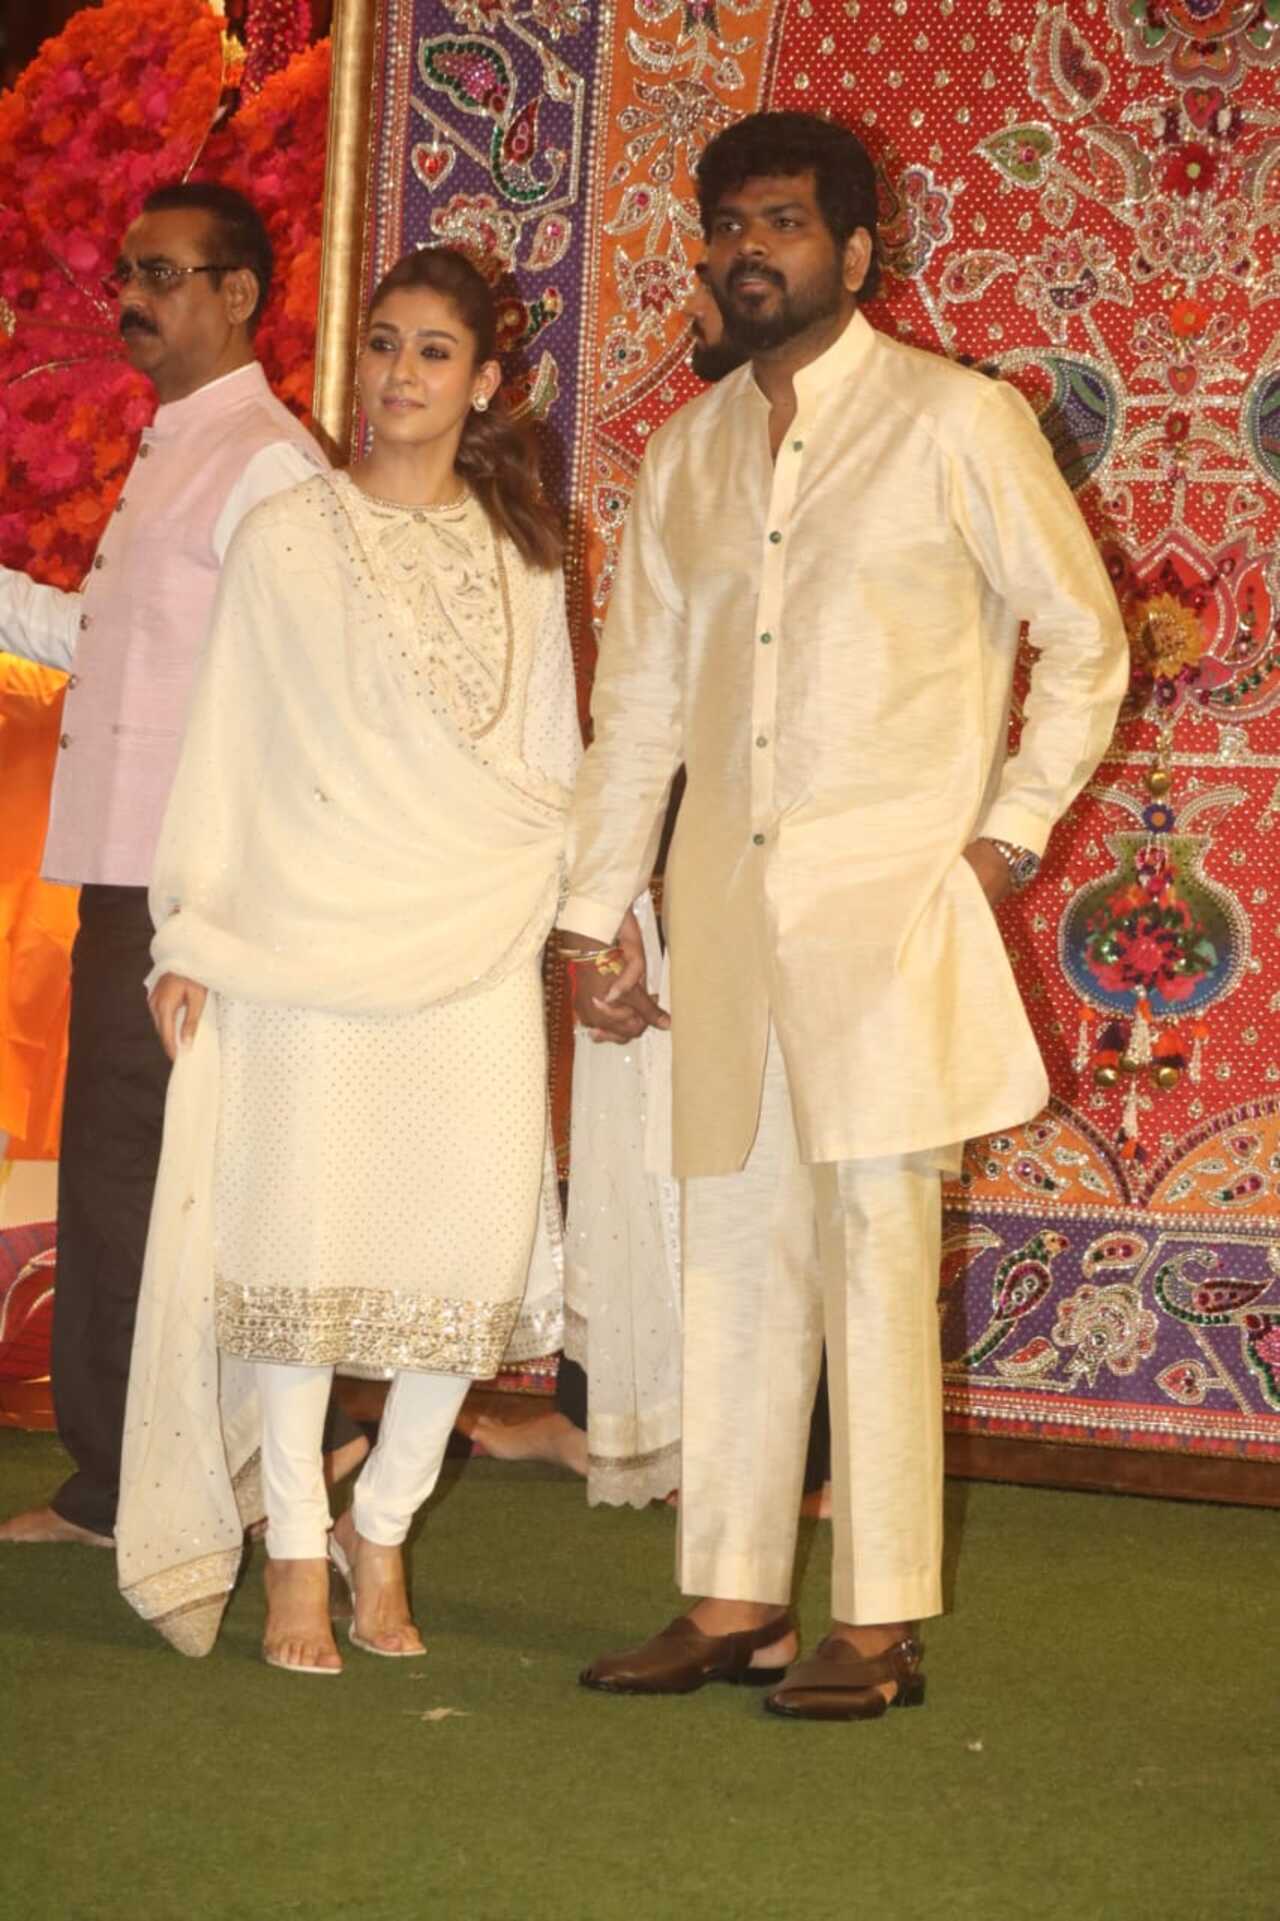 Nayanthara and Vignesh Shivan flew down to Mumbai to attend the Ambanis' Ganesh Puja. They were twinning in ivory-coloured outfits